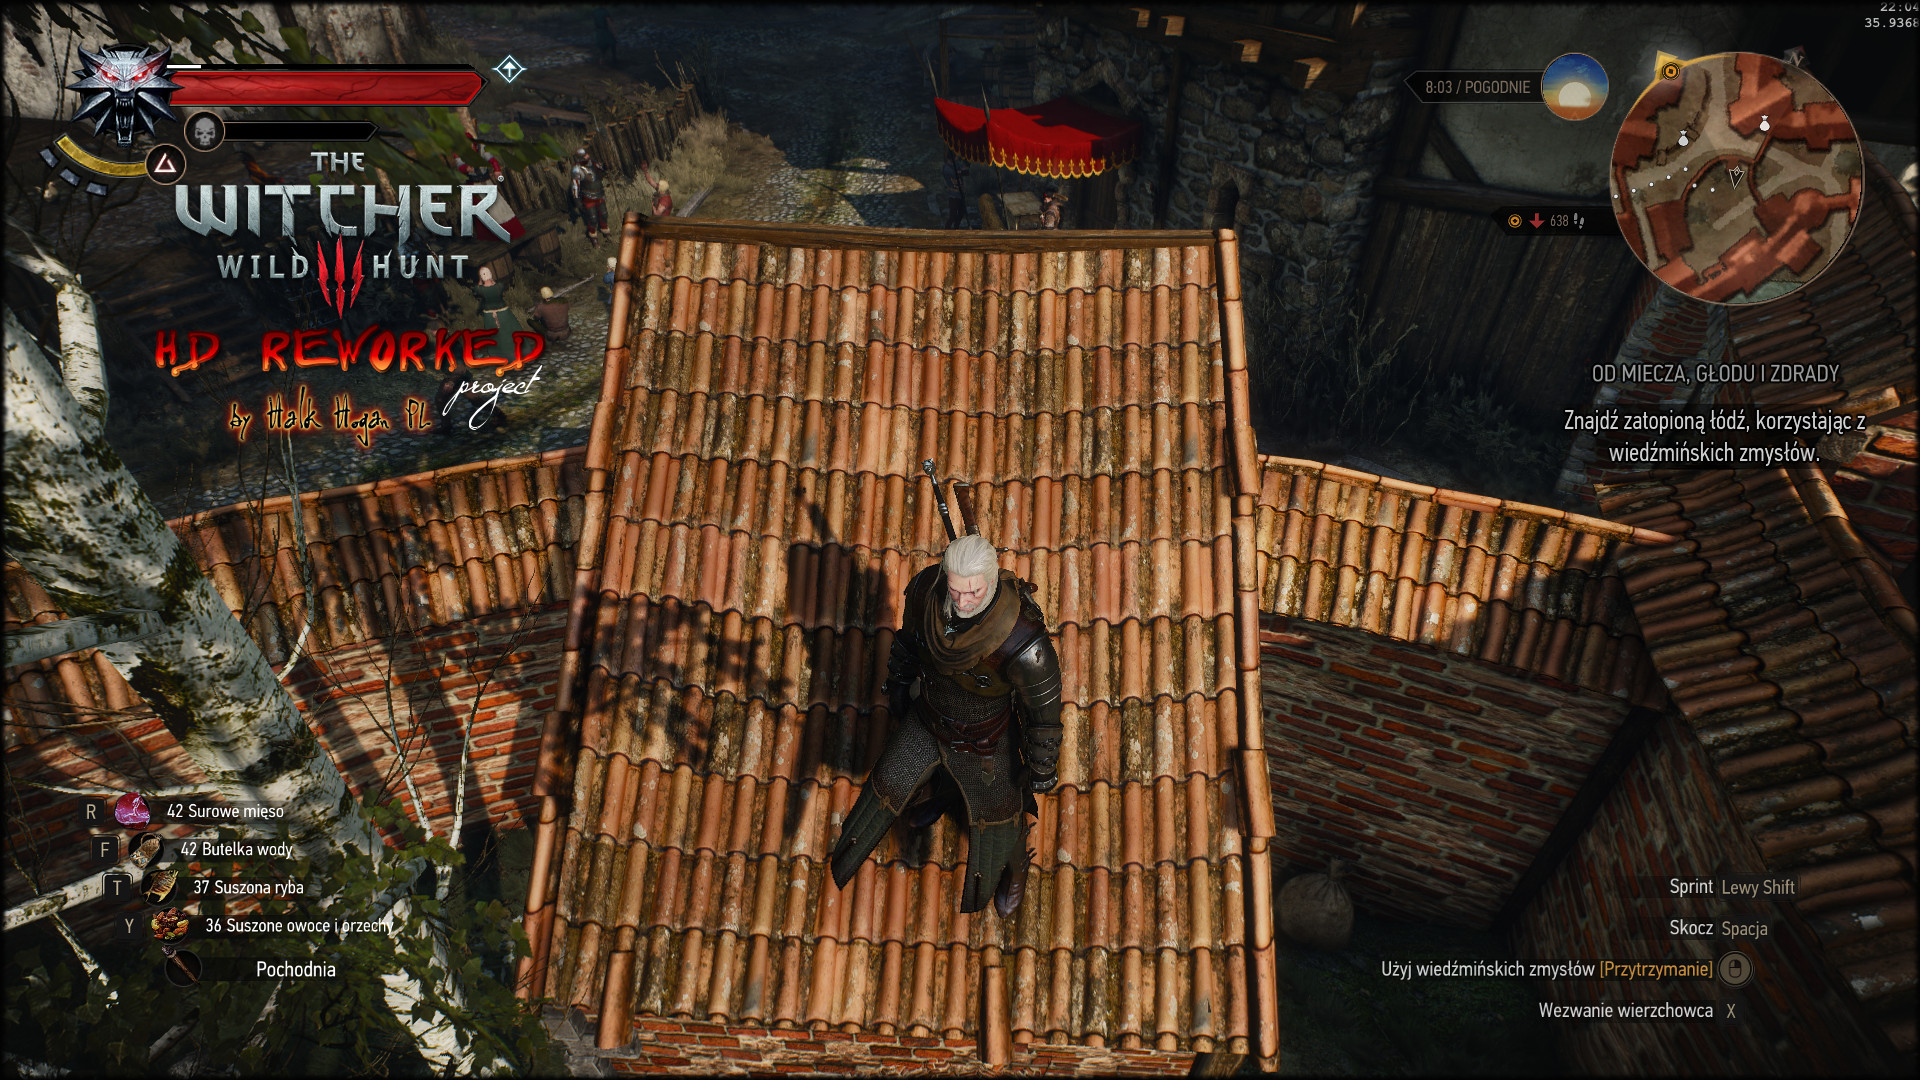 The Witcher 3: Wild Hunt High Res Texture mod 2.0 coming soon 